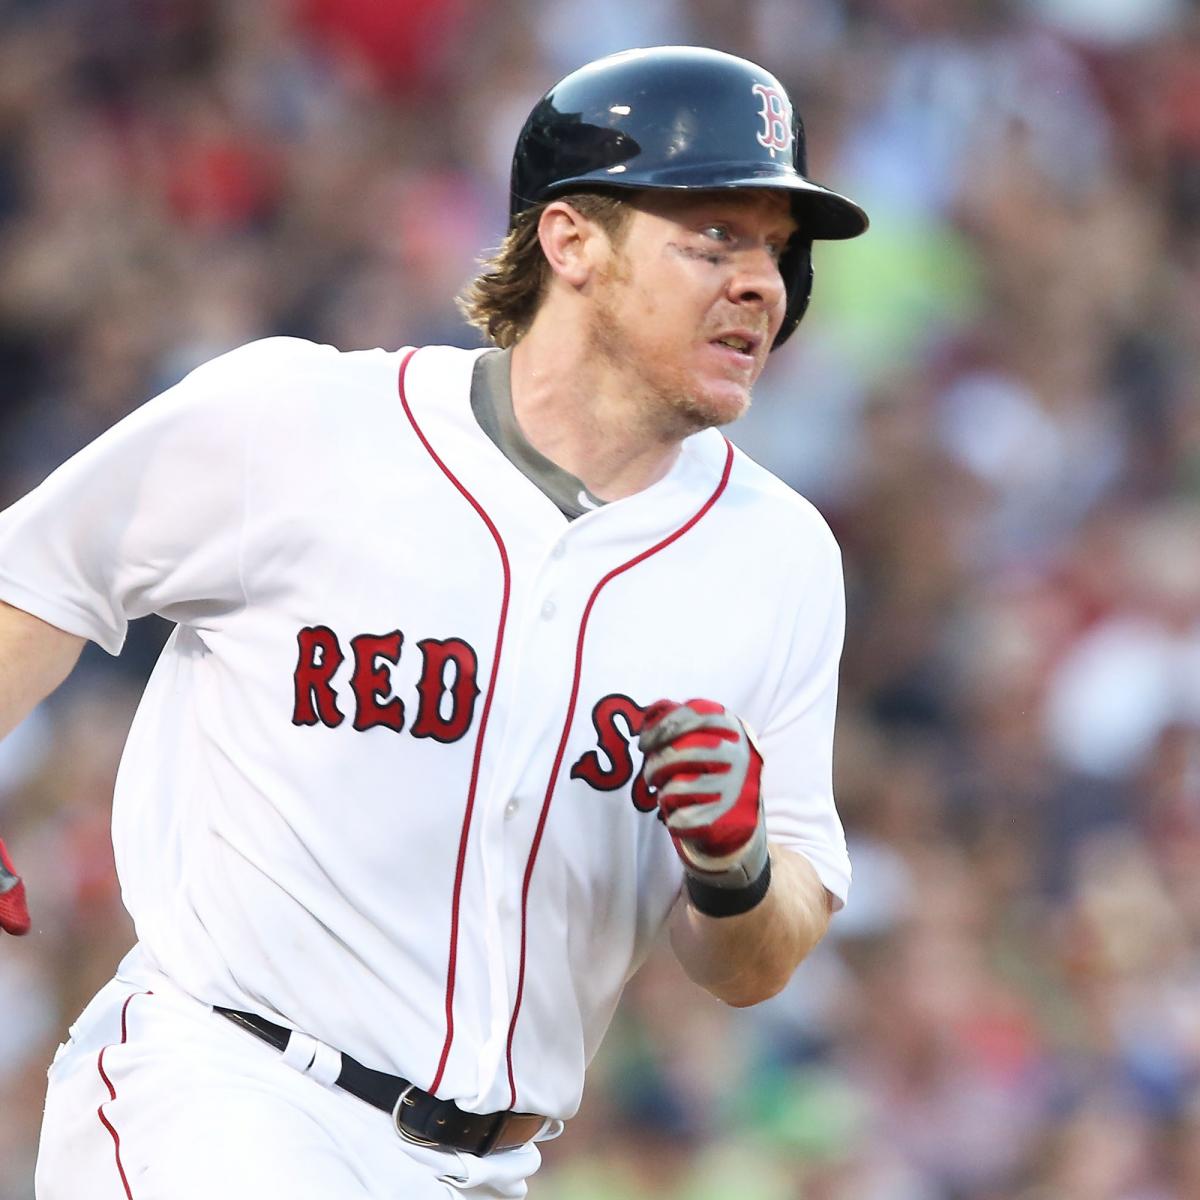 Hanigan turns out to be a great catch for Red Sox